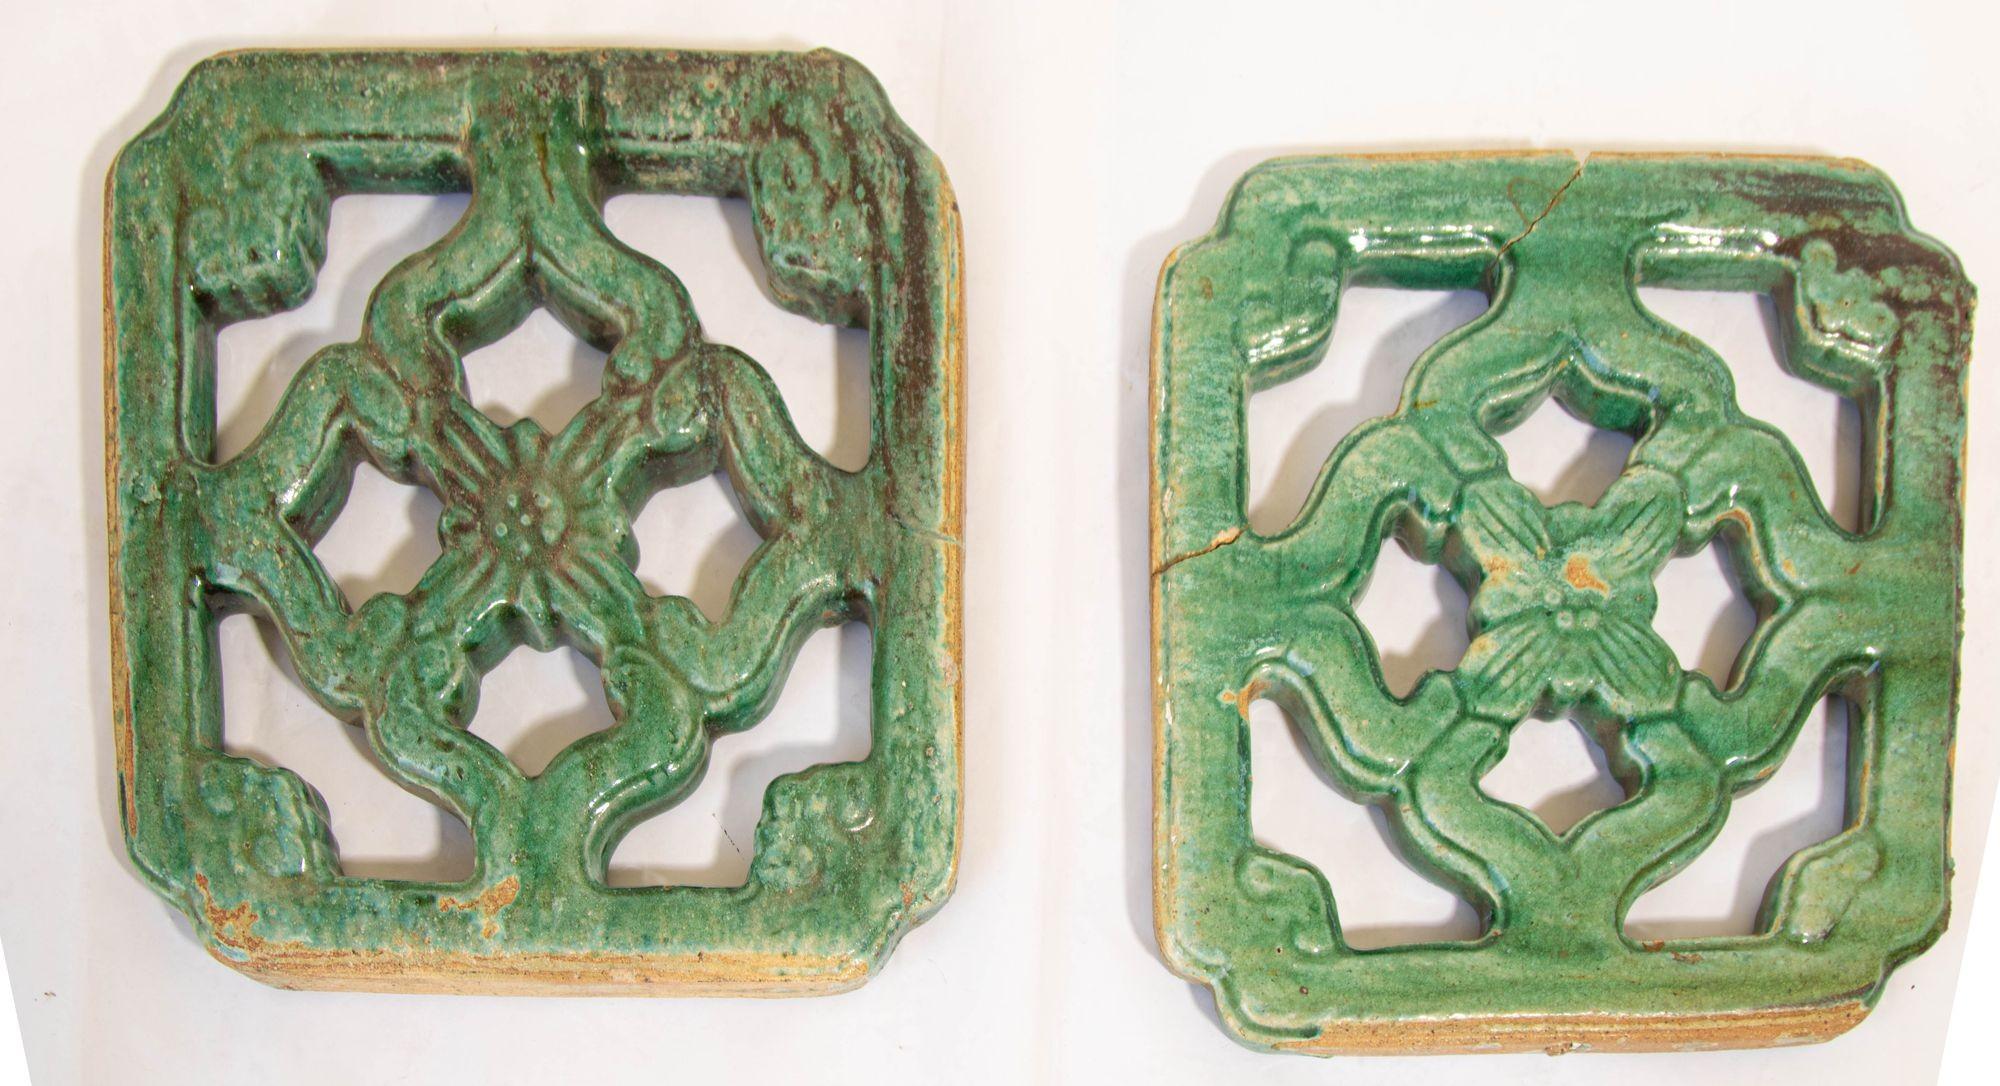 Antique Chinese Emerald Green Glazed Architectural Tile, circa 1900 Set of 2 For Sale 6